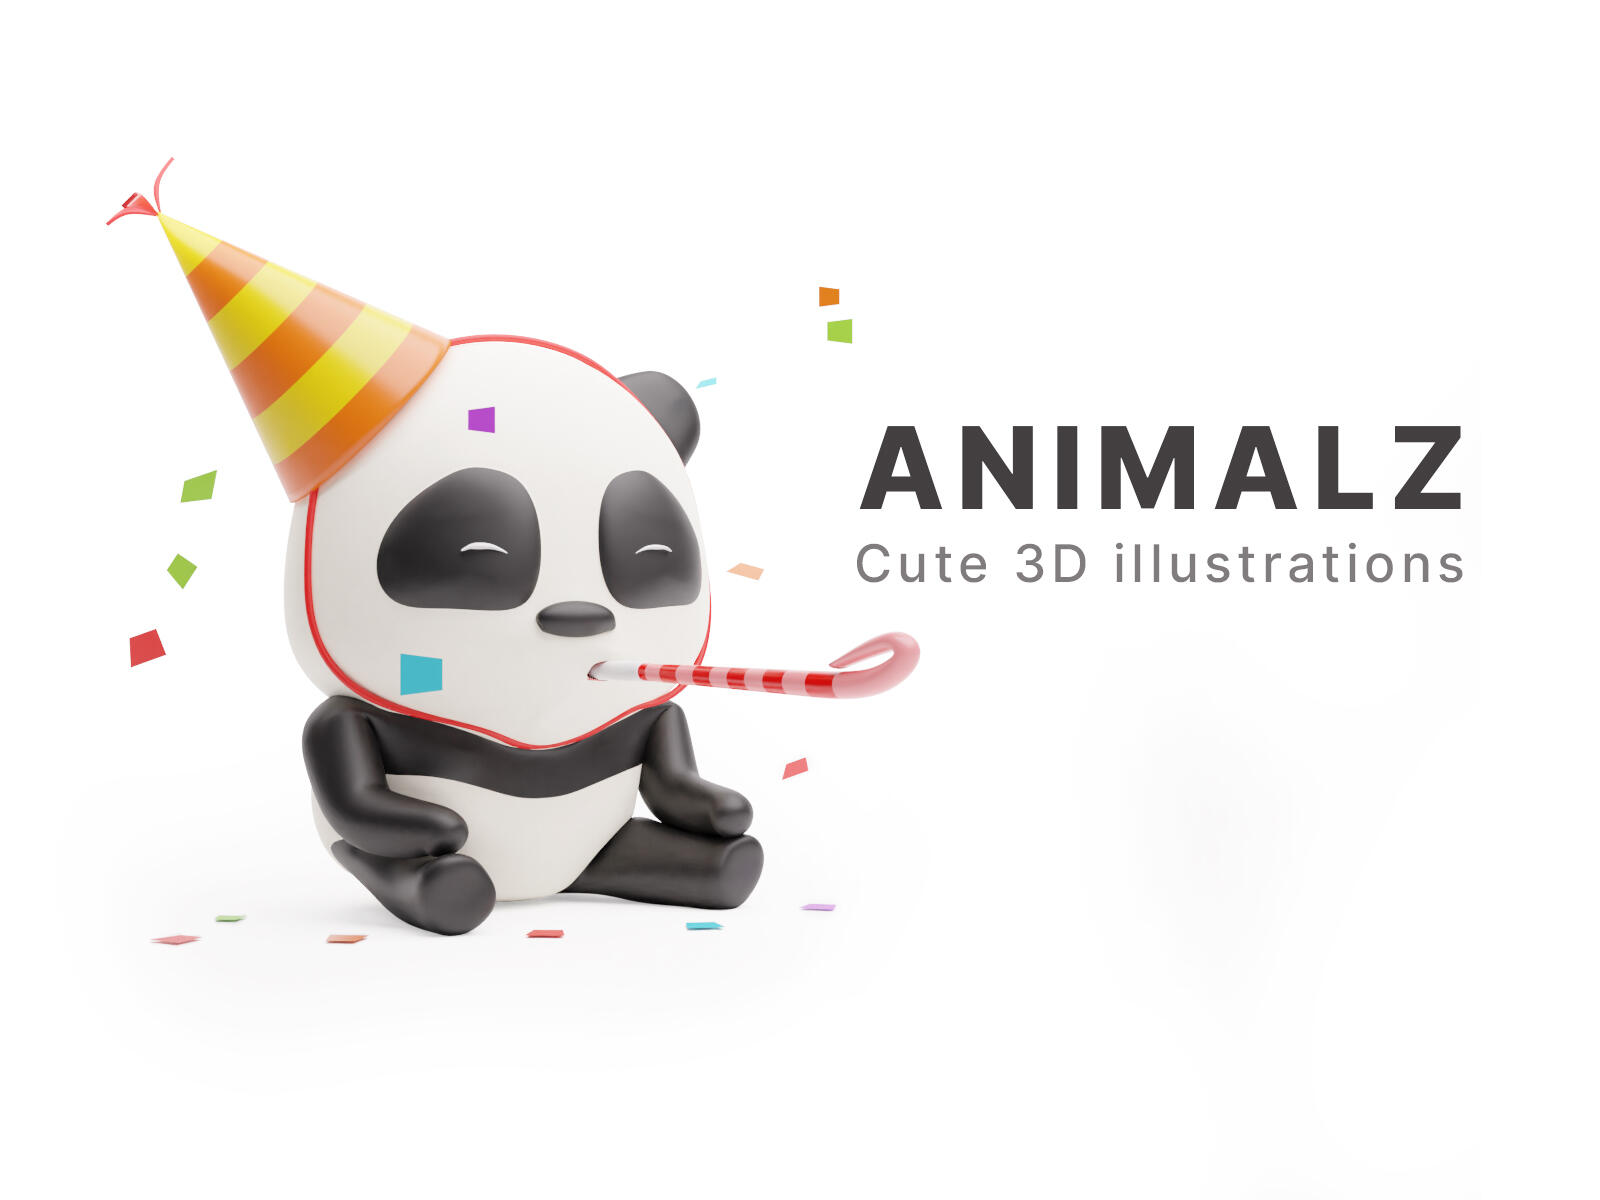 Animalz - 3D Cartoon fully rigged animals in different poses.